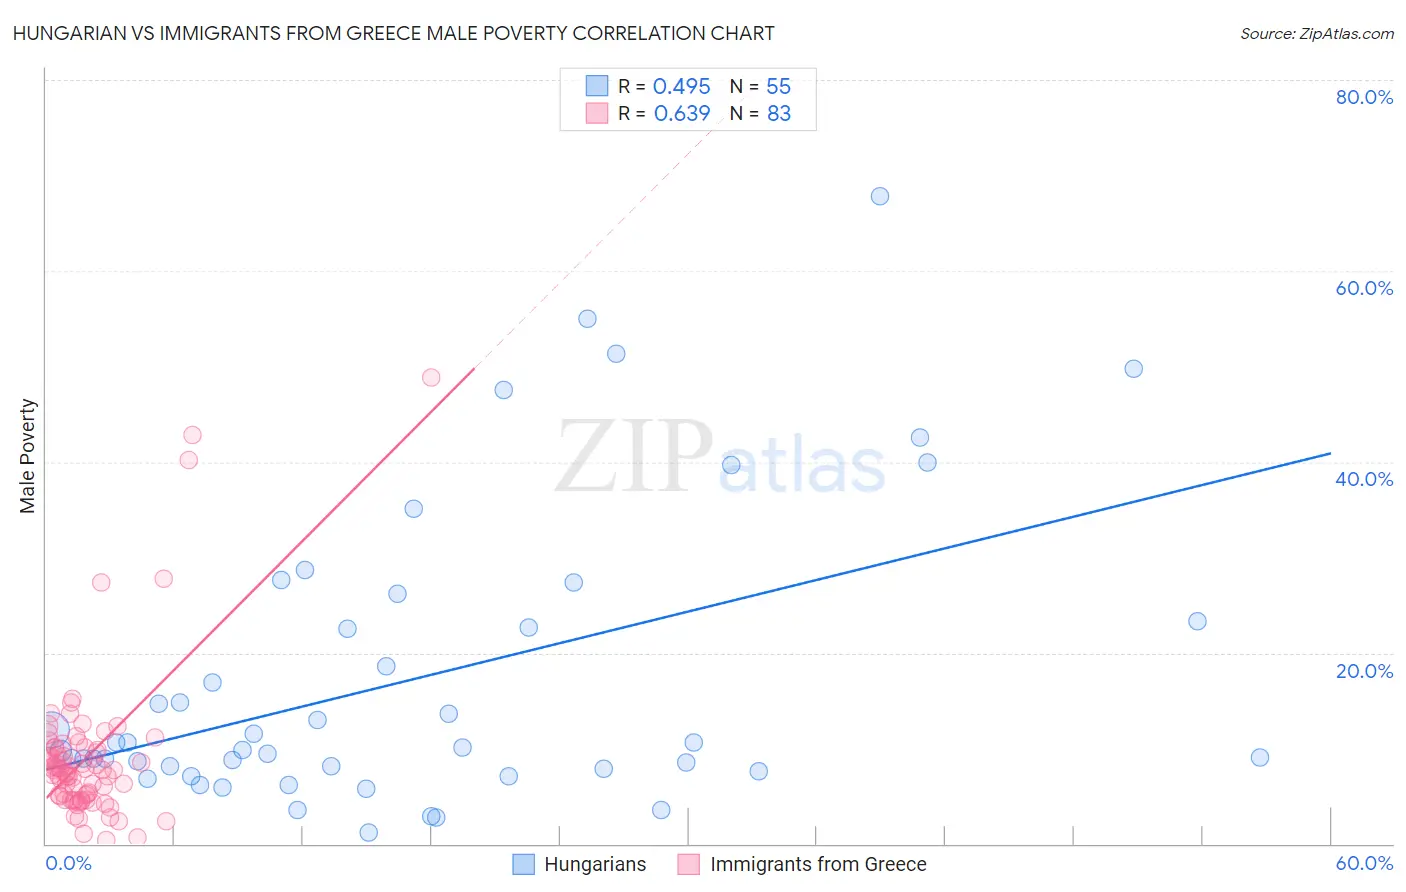 Hungarian vs Immigrants from Greece Male Poverty